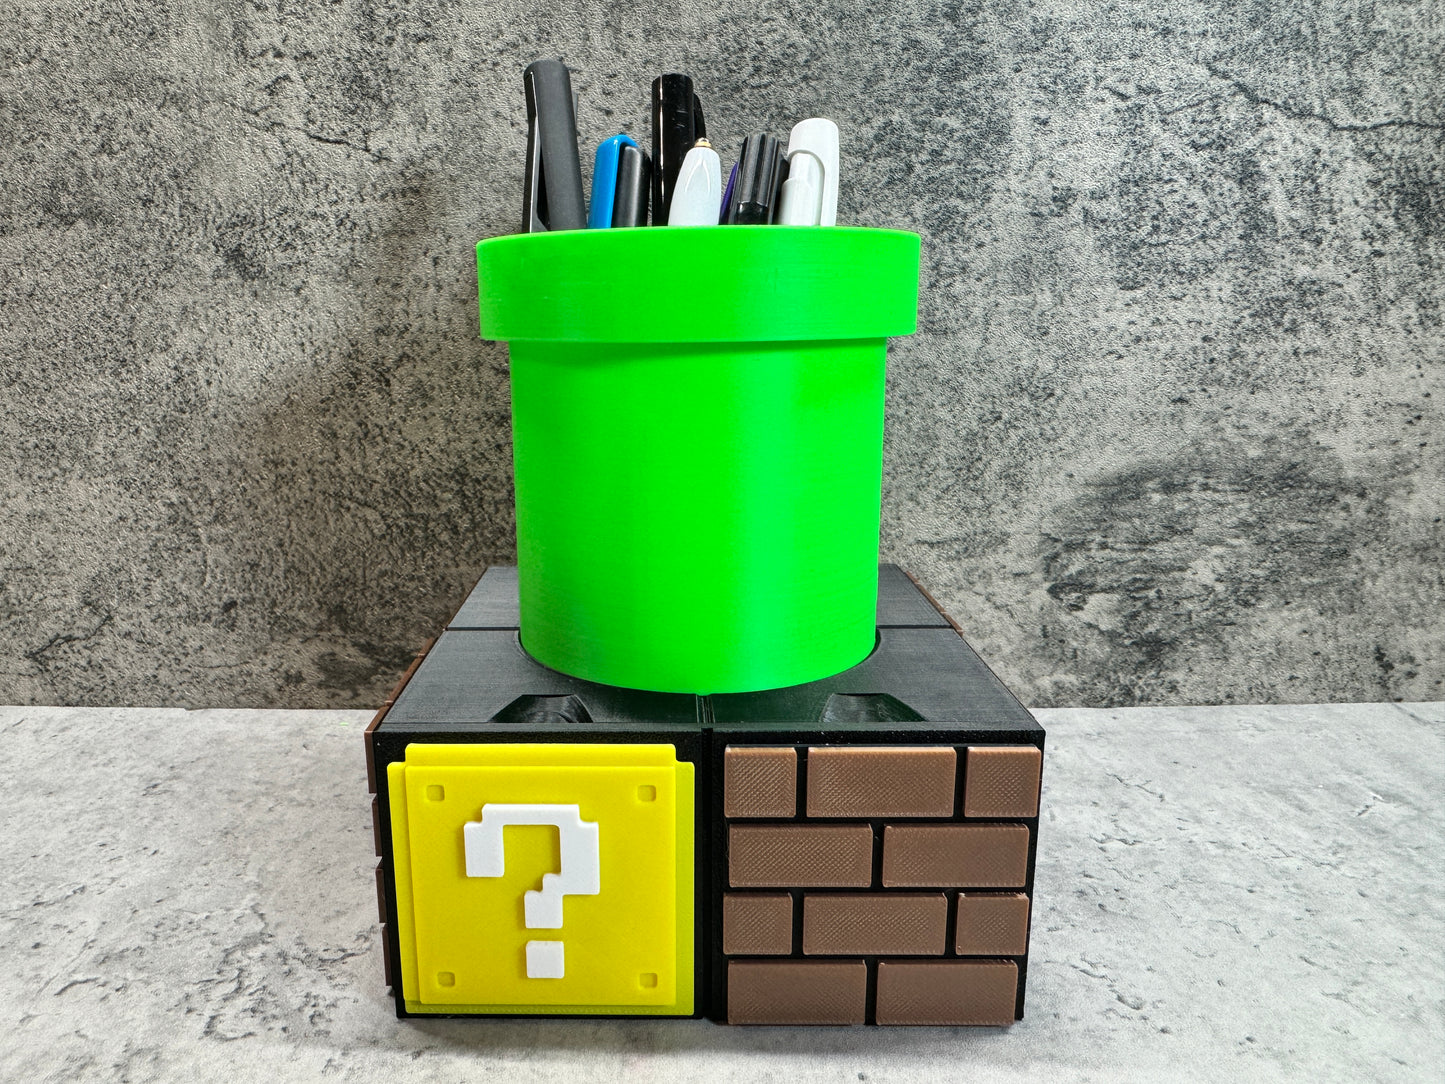 a green cup sitting on top of a block with a question mark on it